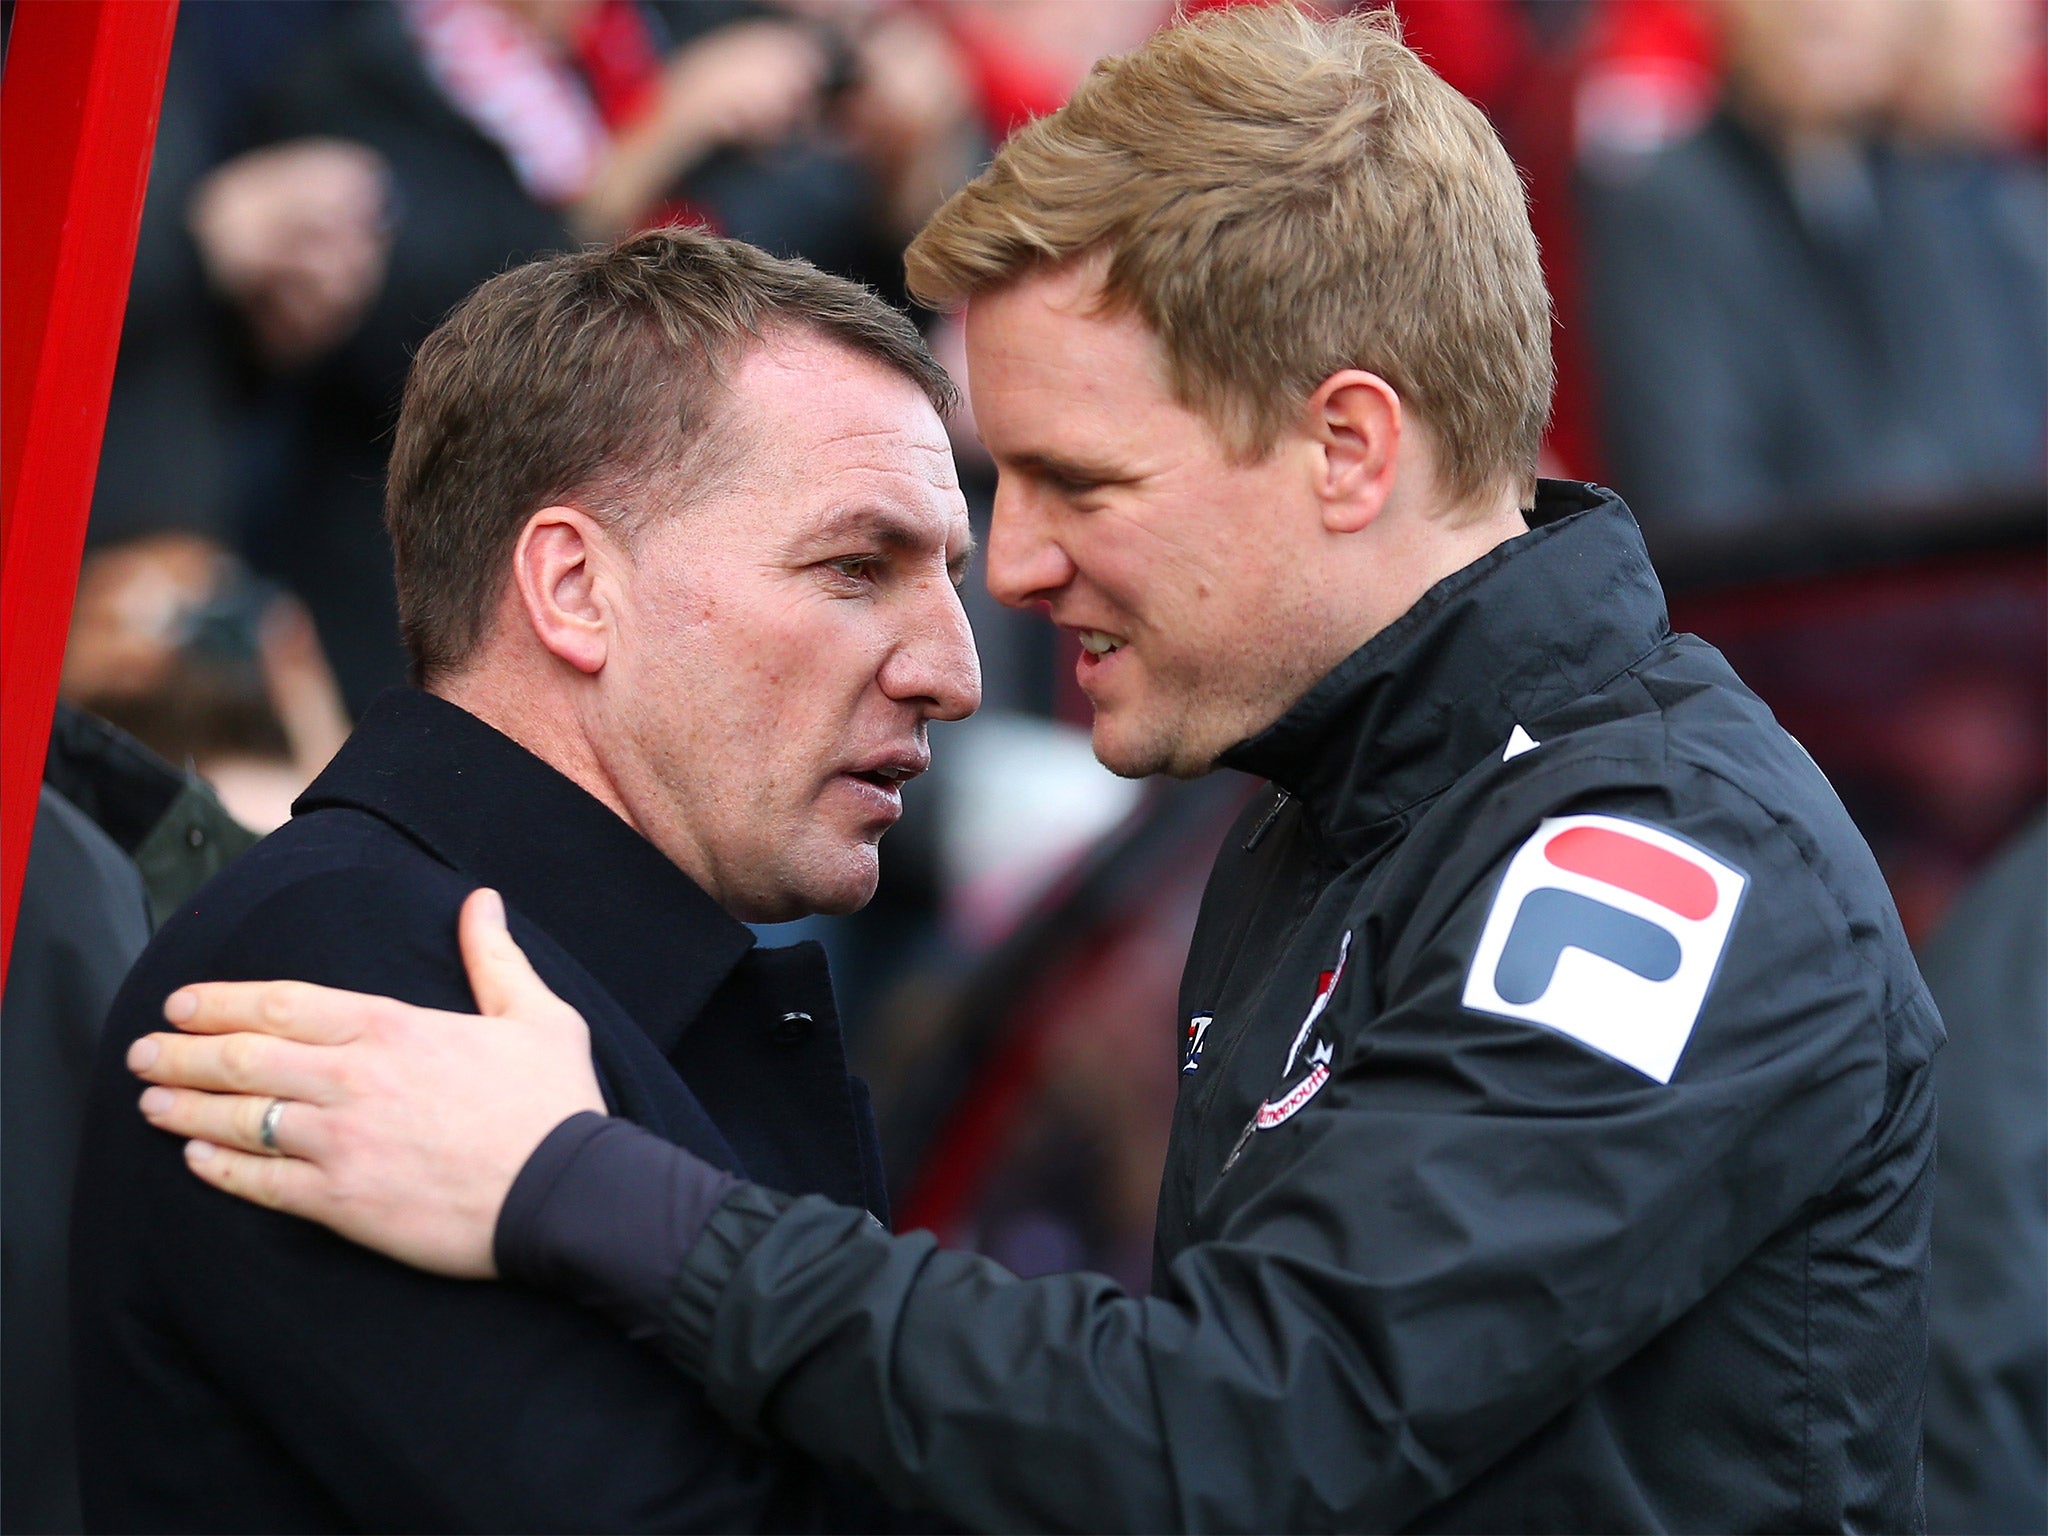 Eddie Howe (right) and Brendan Rodgers greet each other in the FA Cup last year